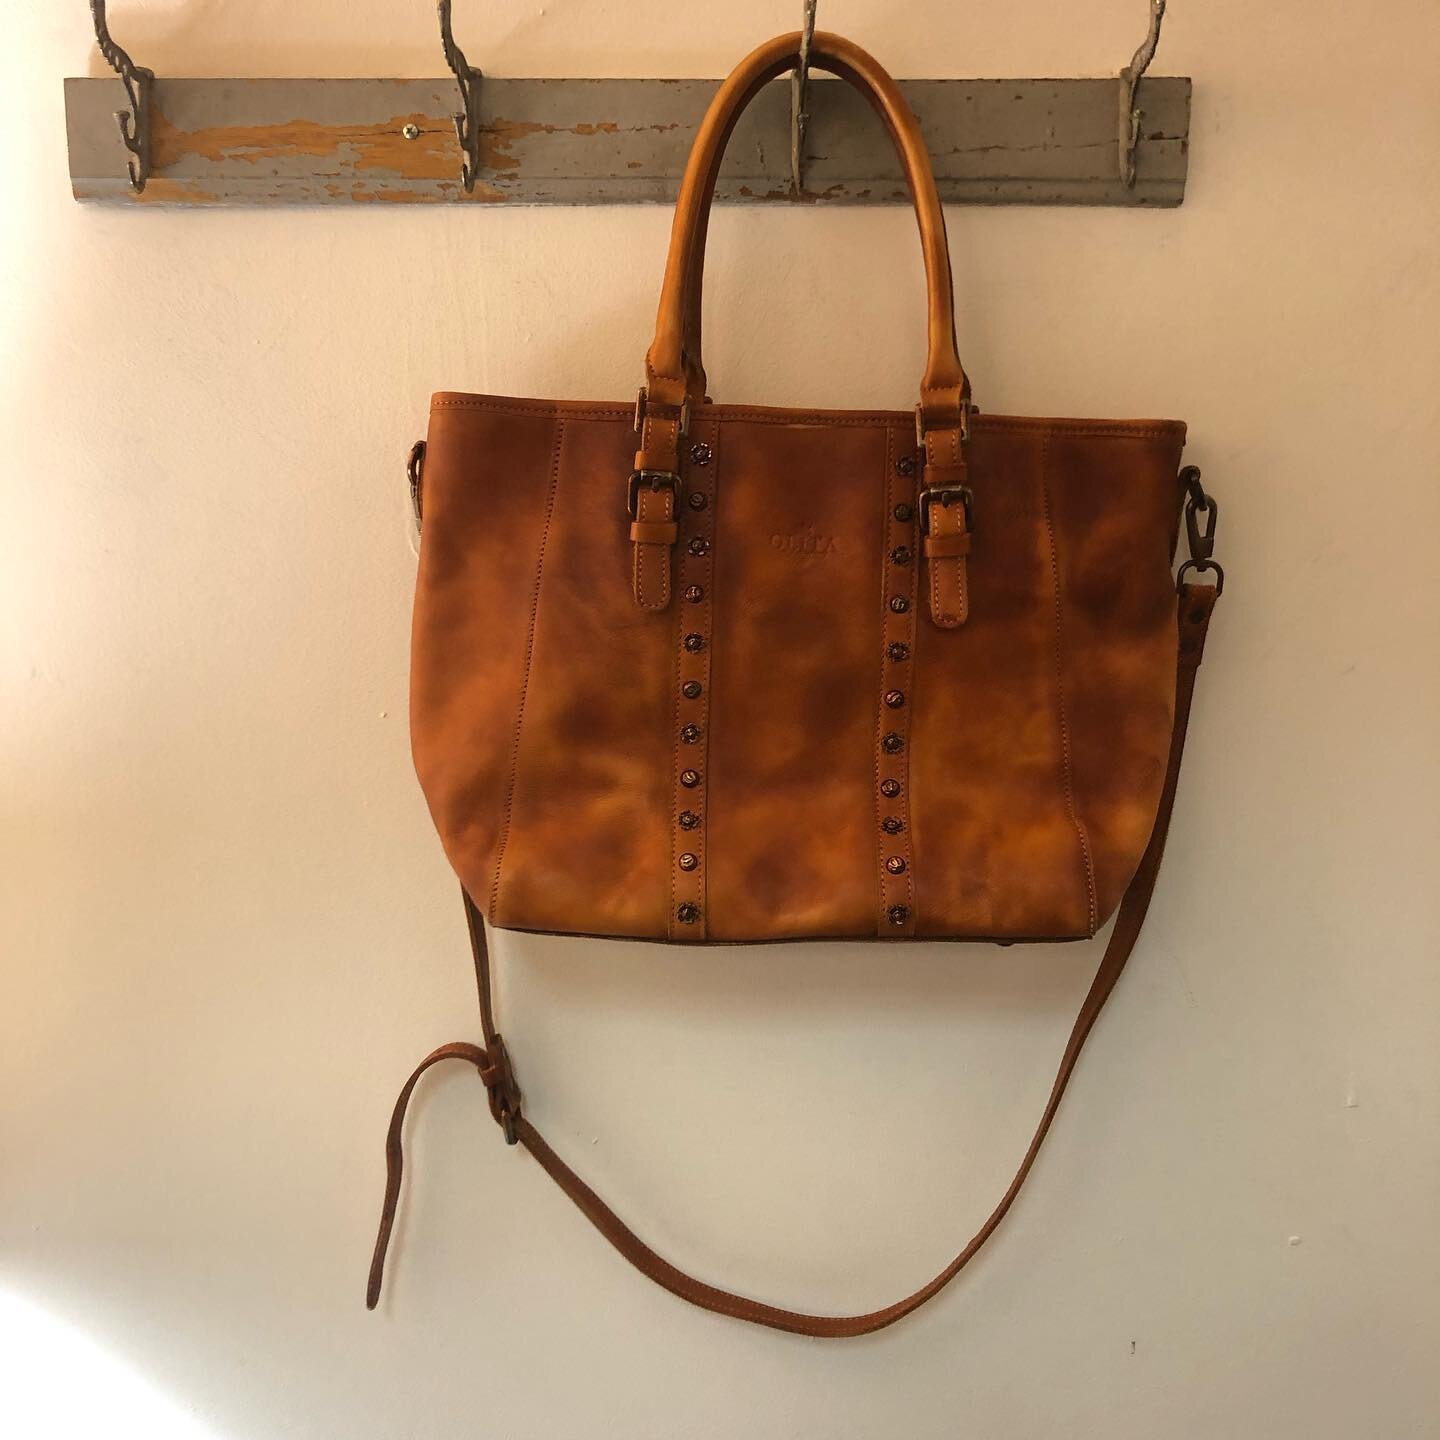 This Genuine Leather Olita purse we just got in is so beautiful!! 🤩🌻🌸